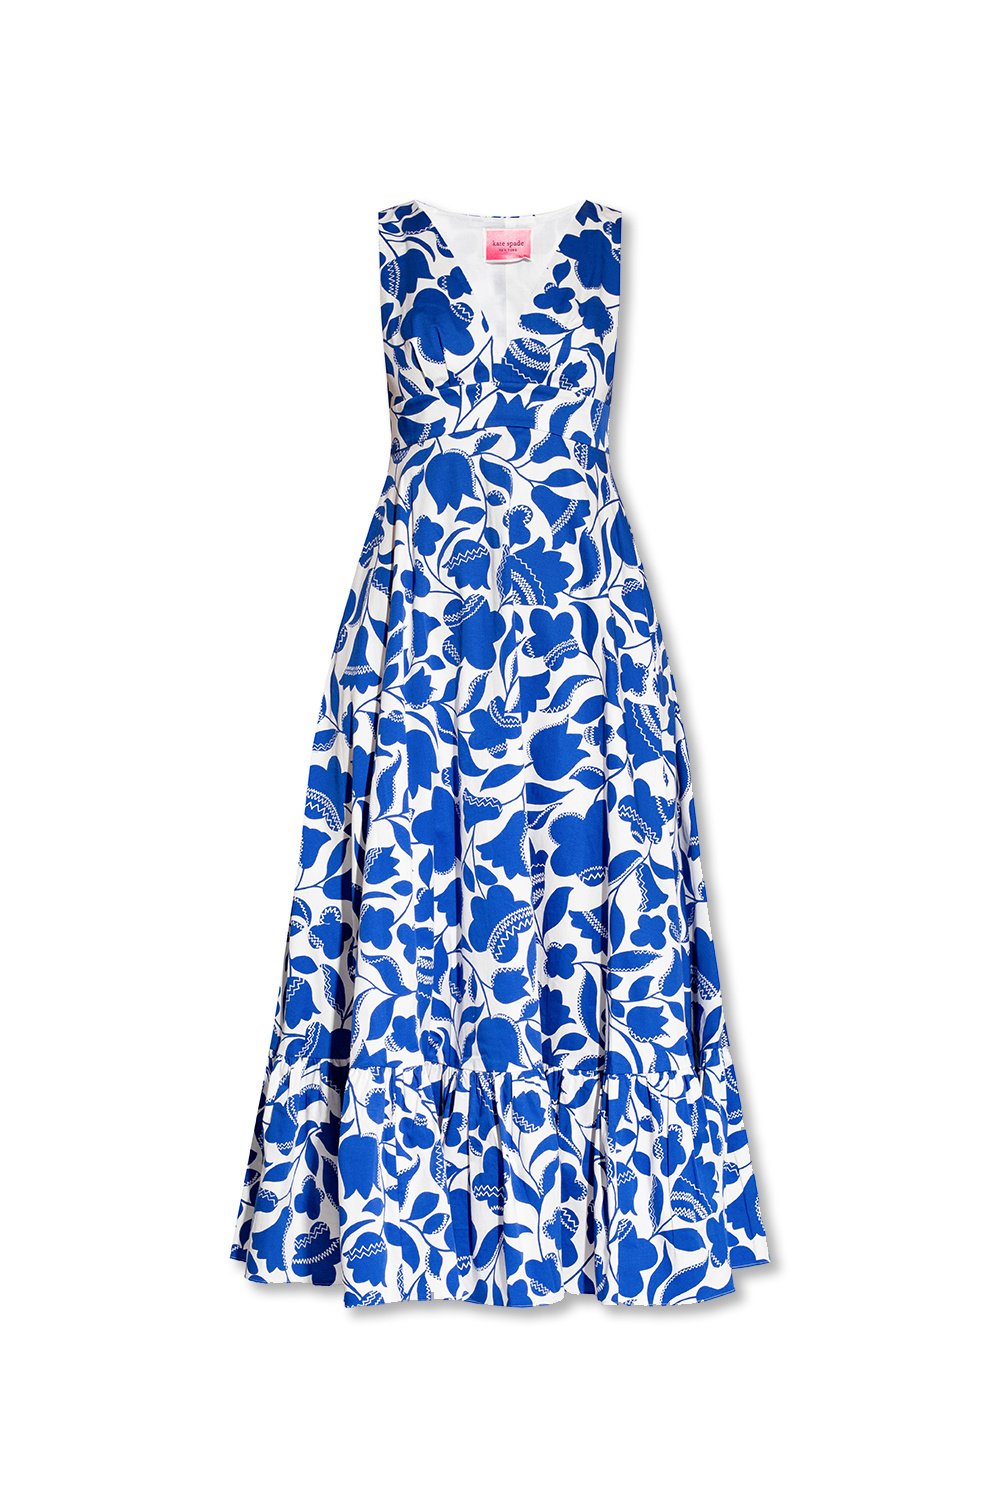 Kate Spade Dress with floral motif, Women's Clothing